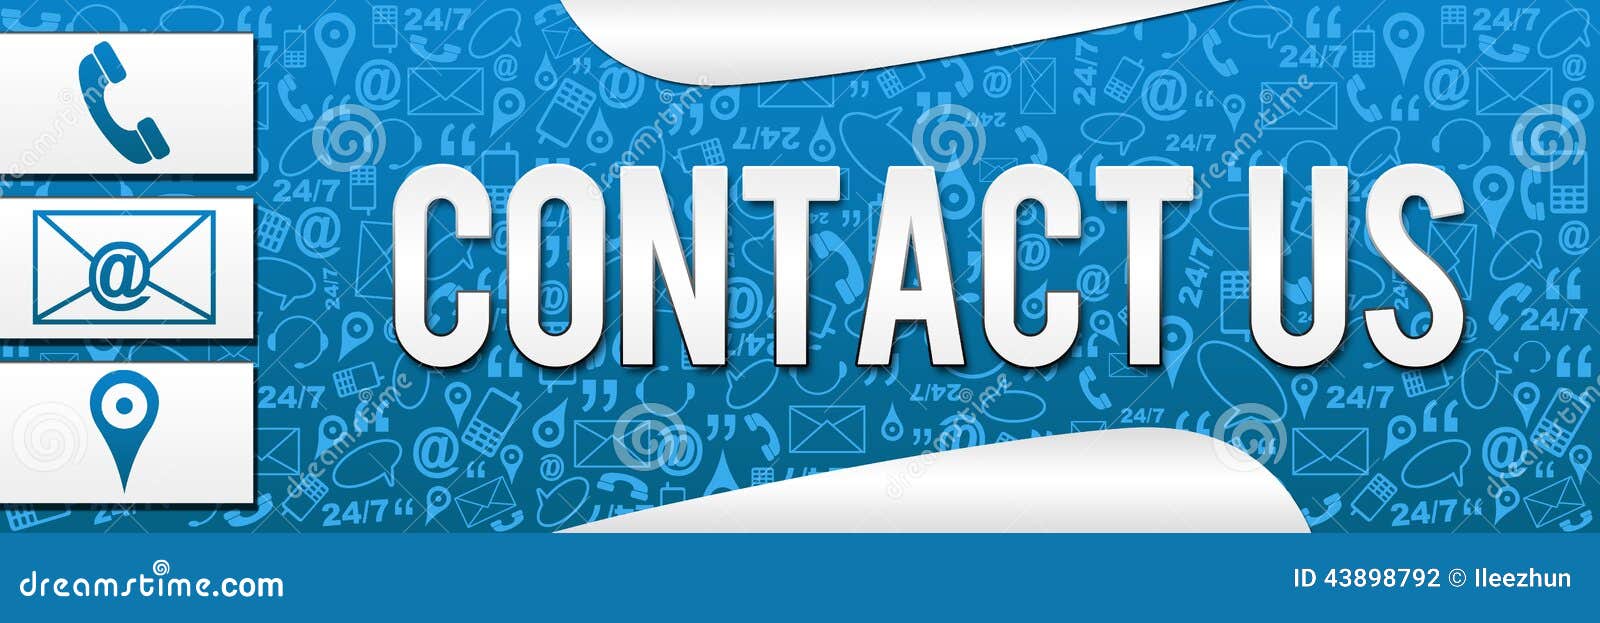 Contact Us Banner Texture Stock Illustration - Image: 43898792